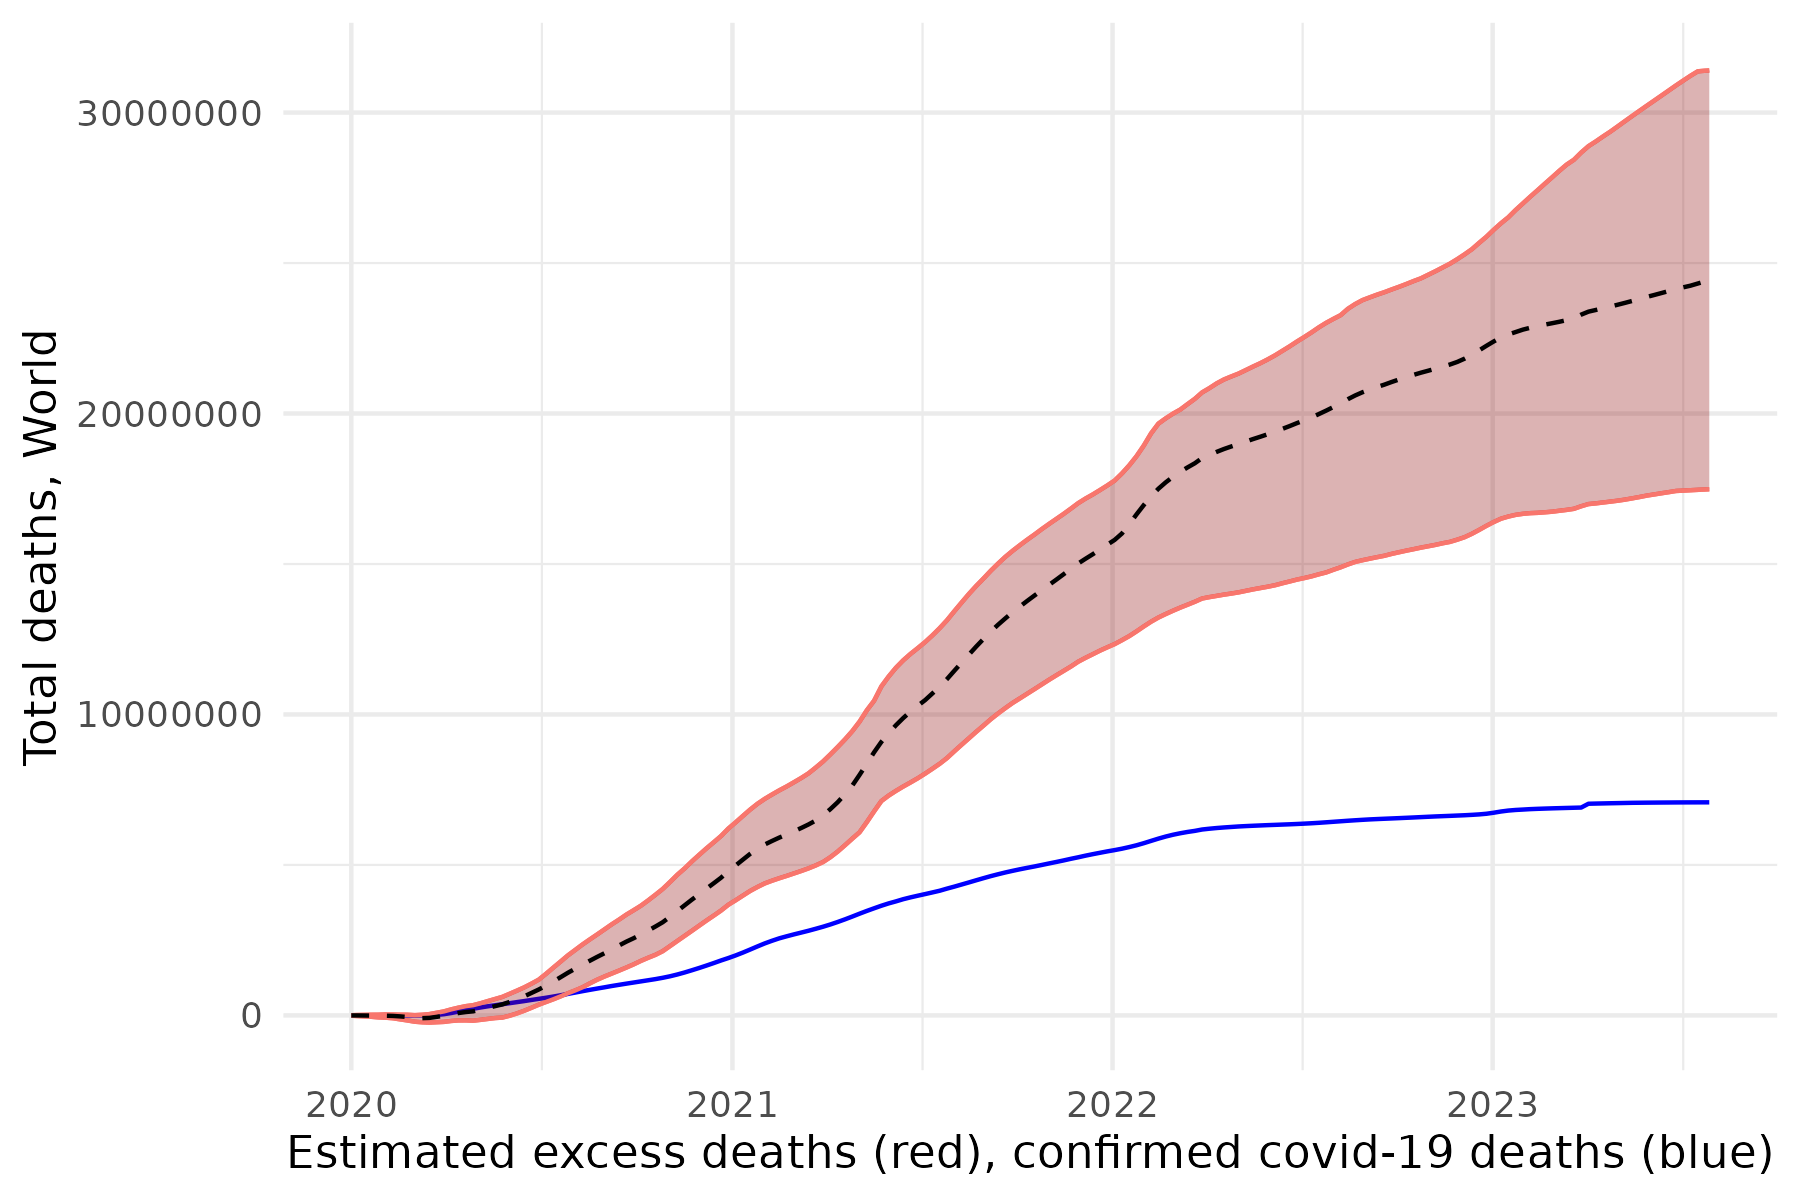 Chart of total deaths over time